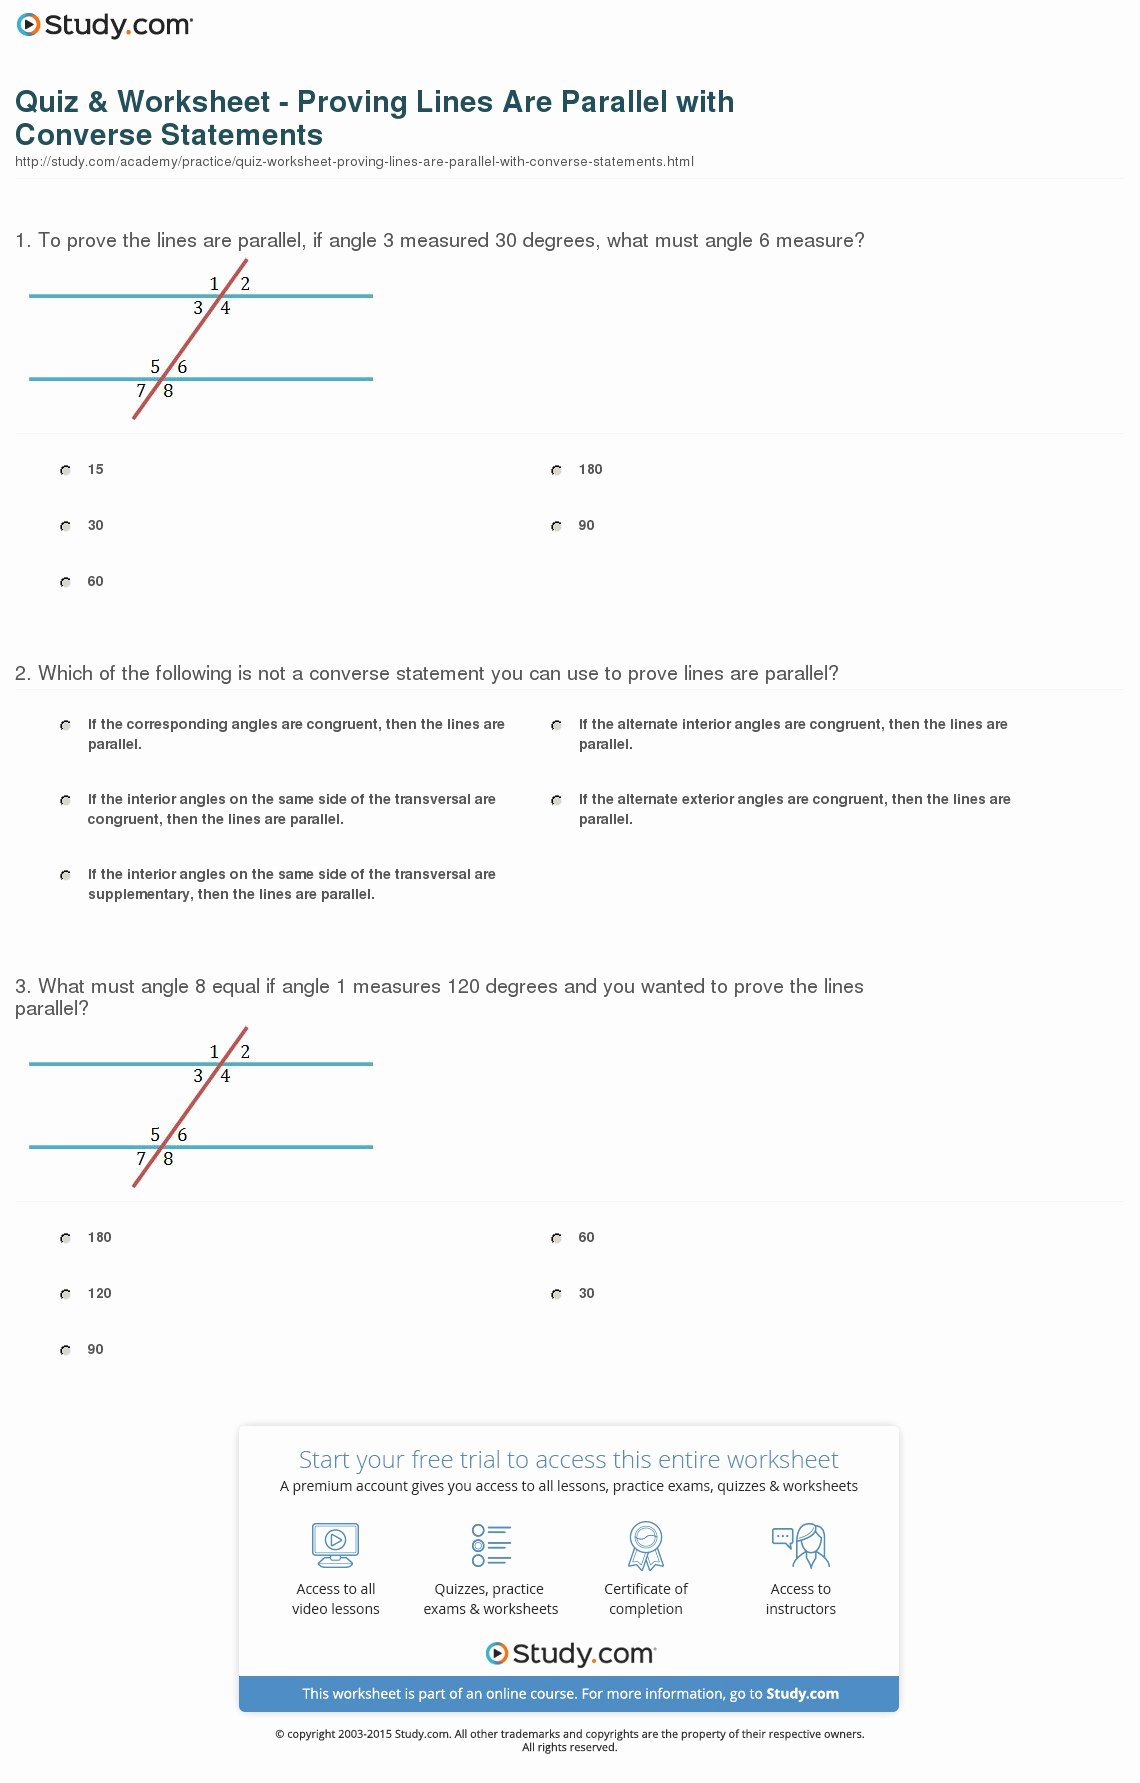 Parallel Lines Proofs Worksheet Answers Unique Quiz &amp; Worksheet Proving Lines are Parallel with